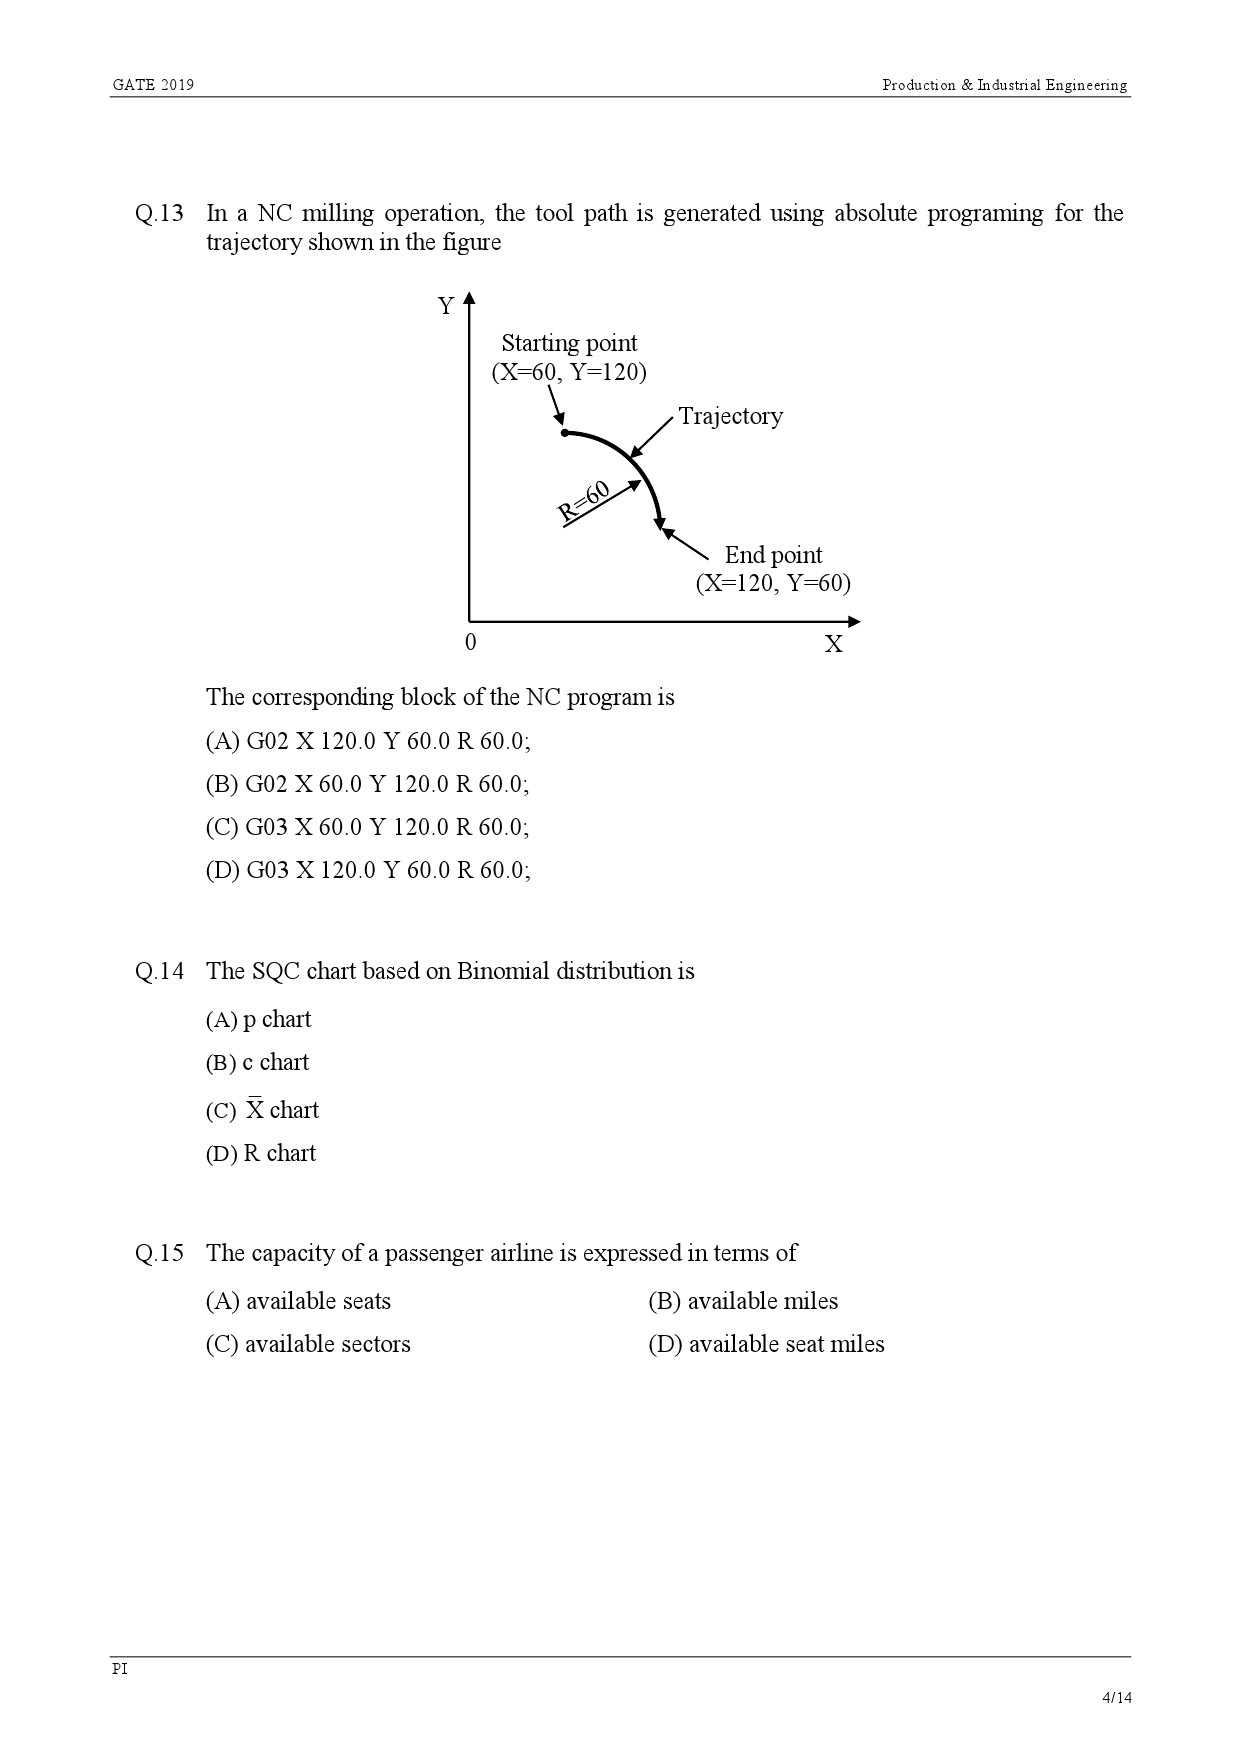 GATE Exam Question Paper 2019 Production and Industrial Engineering 7